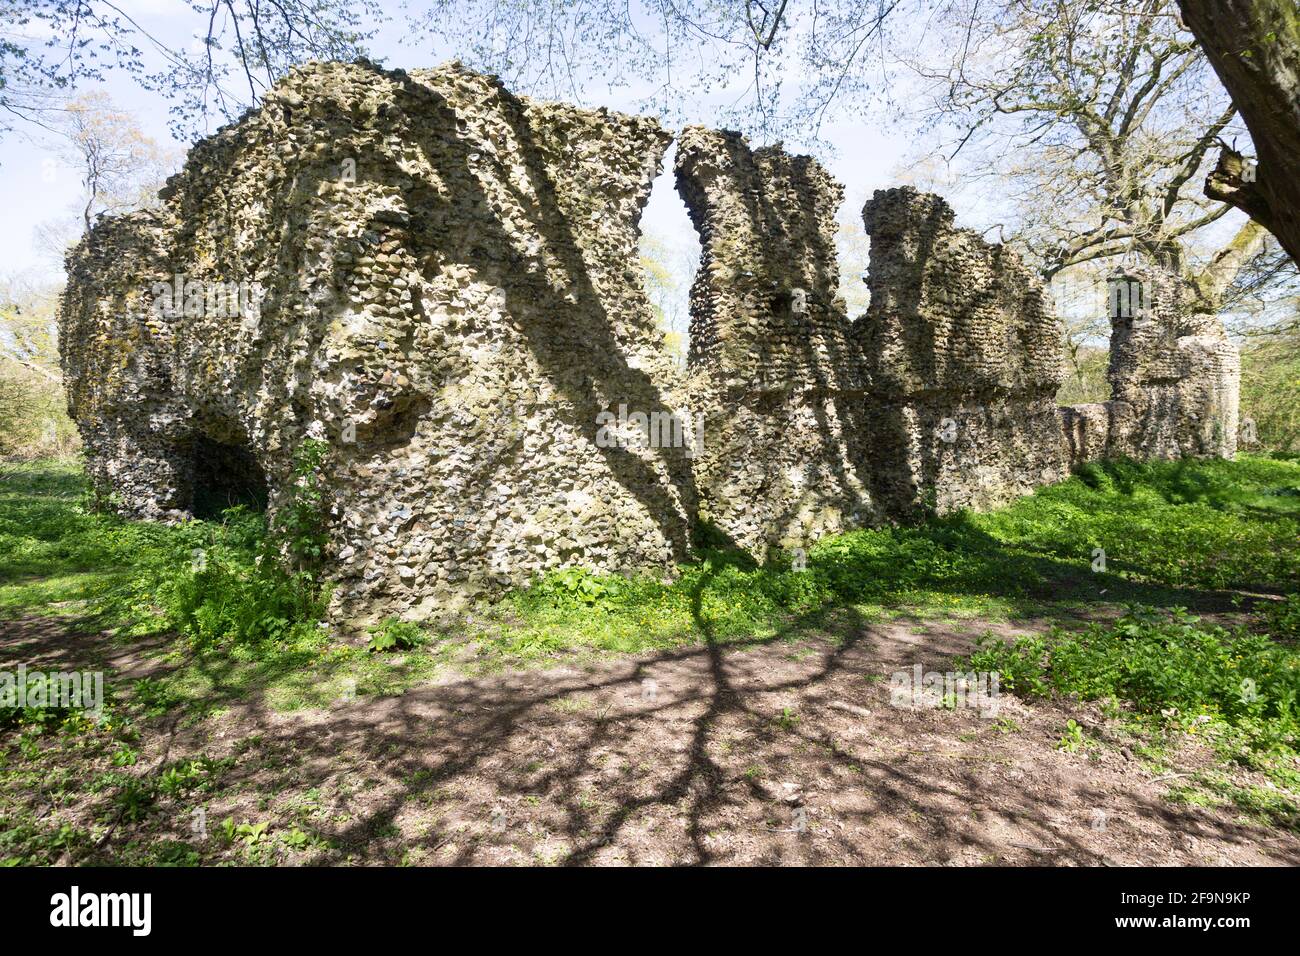 Flint and mortar walls of the ruins of The Minster, South Elmham, Suffolk, England, UK Stock Photo